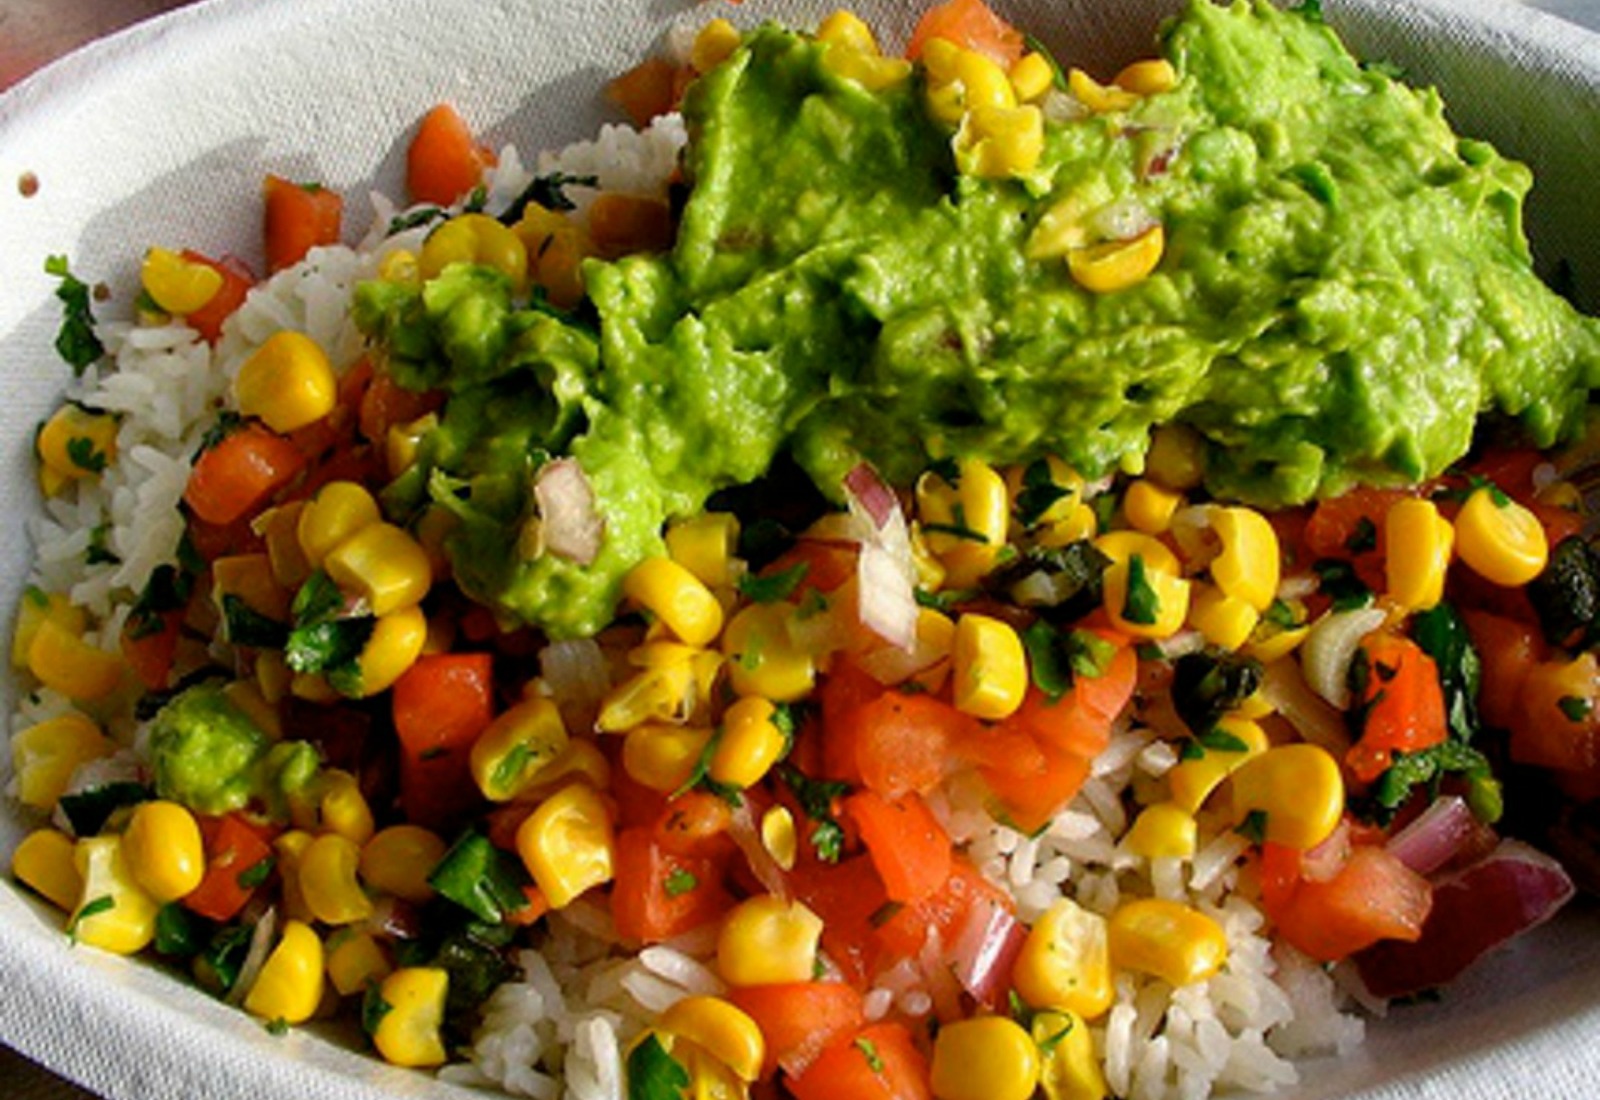 Don't Care About the Super Bowl? Try These Delicious and Healthy Bowls Instead!